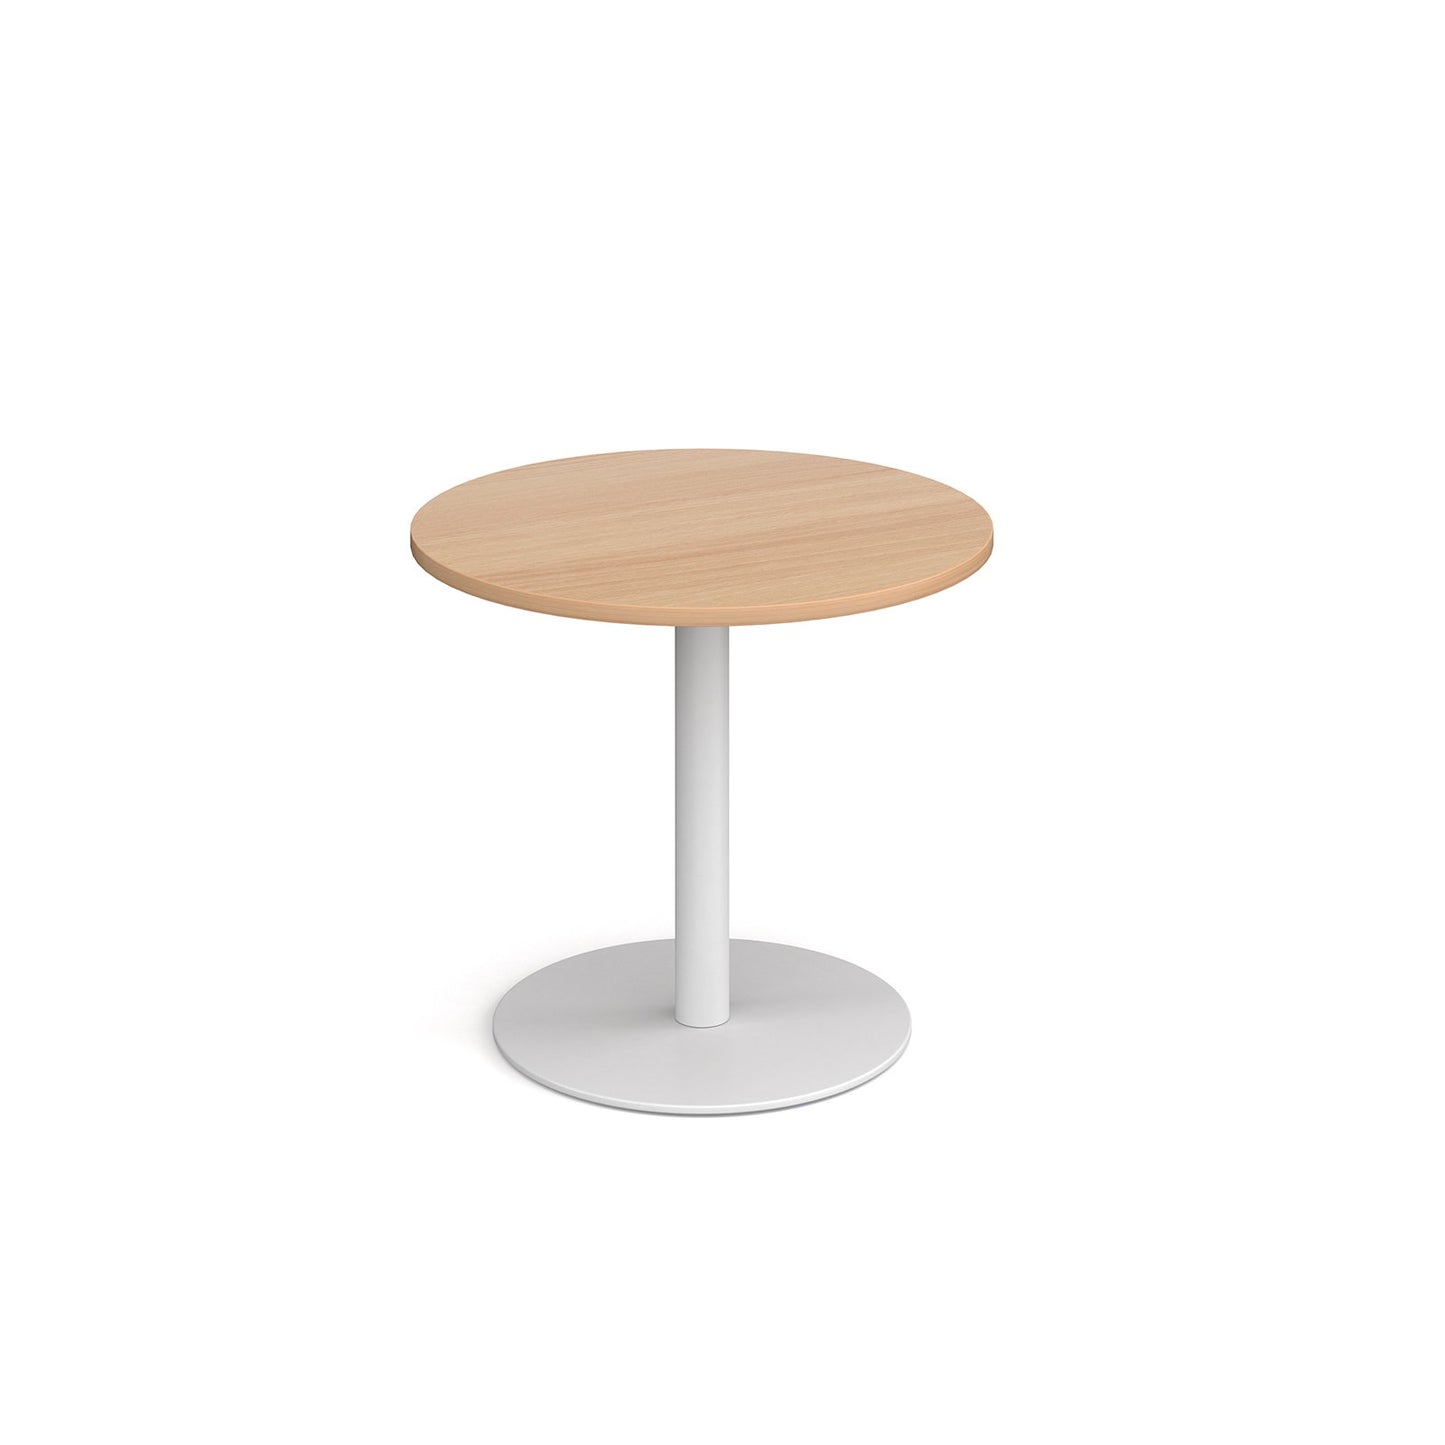 Monza circular dining table with flat round base